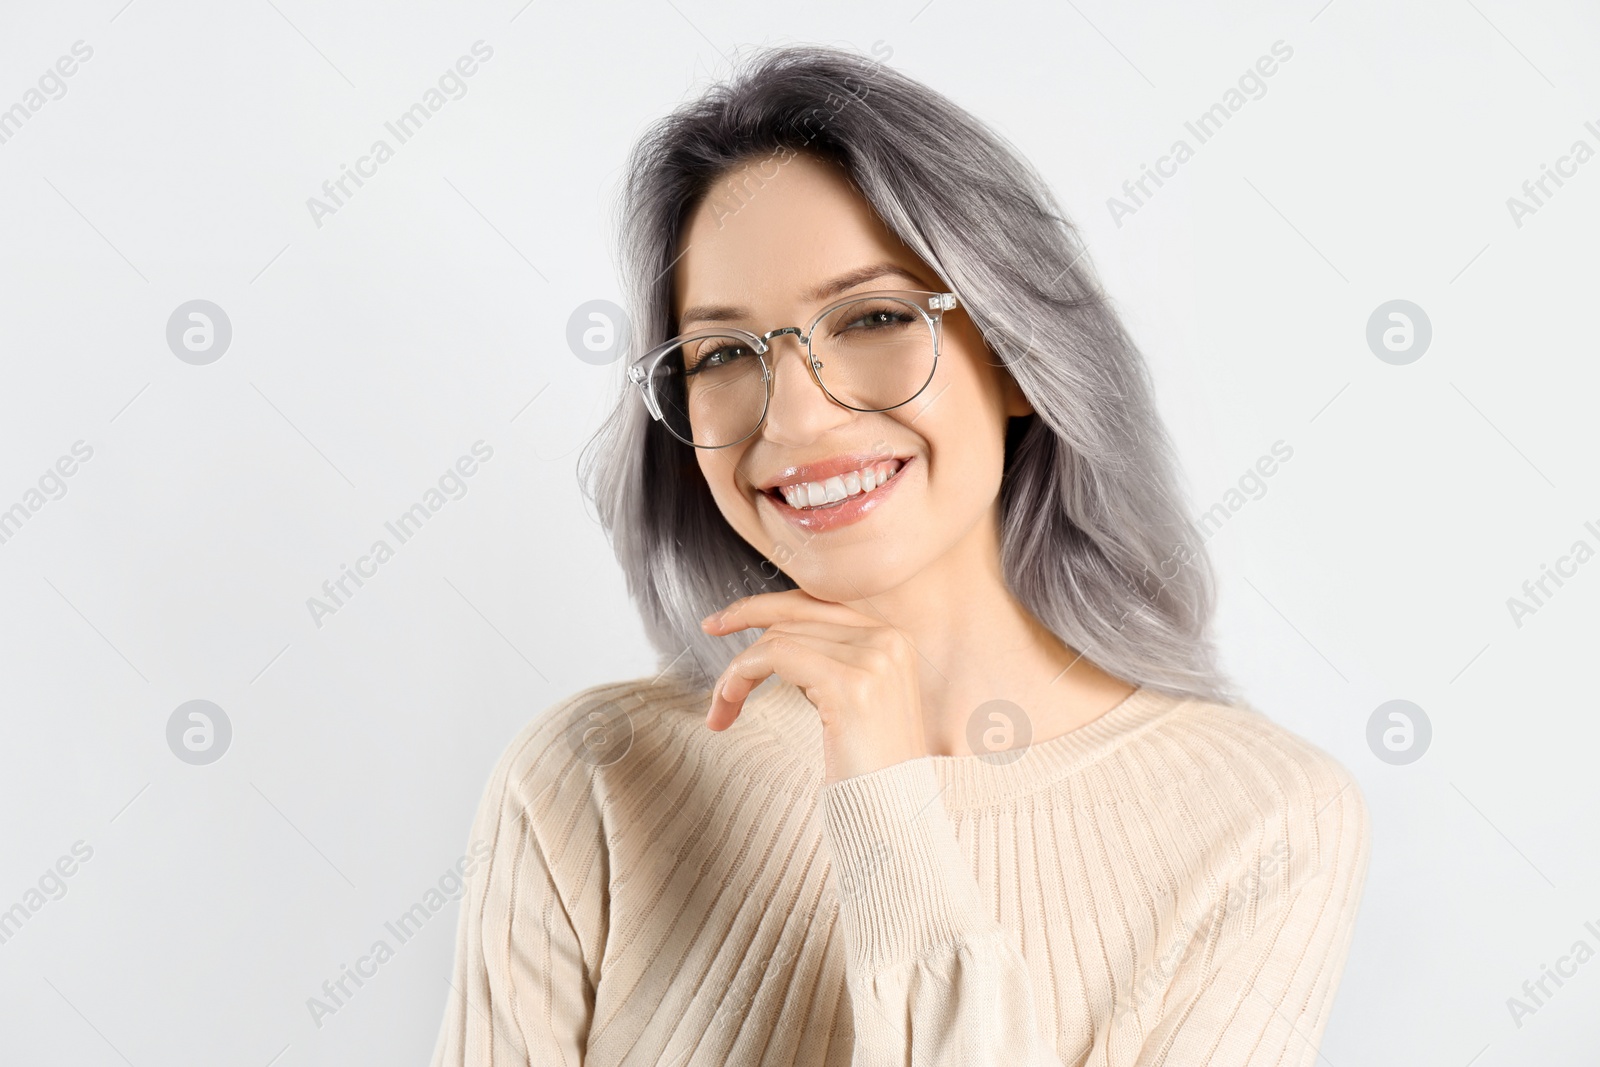 Image of Portrait of smiling woman with ash hair color on light background